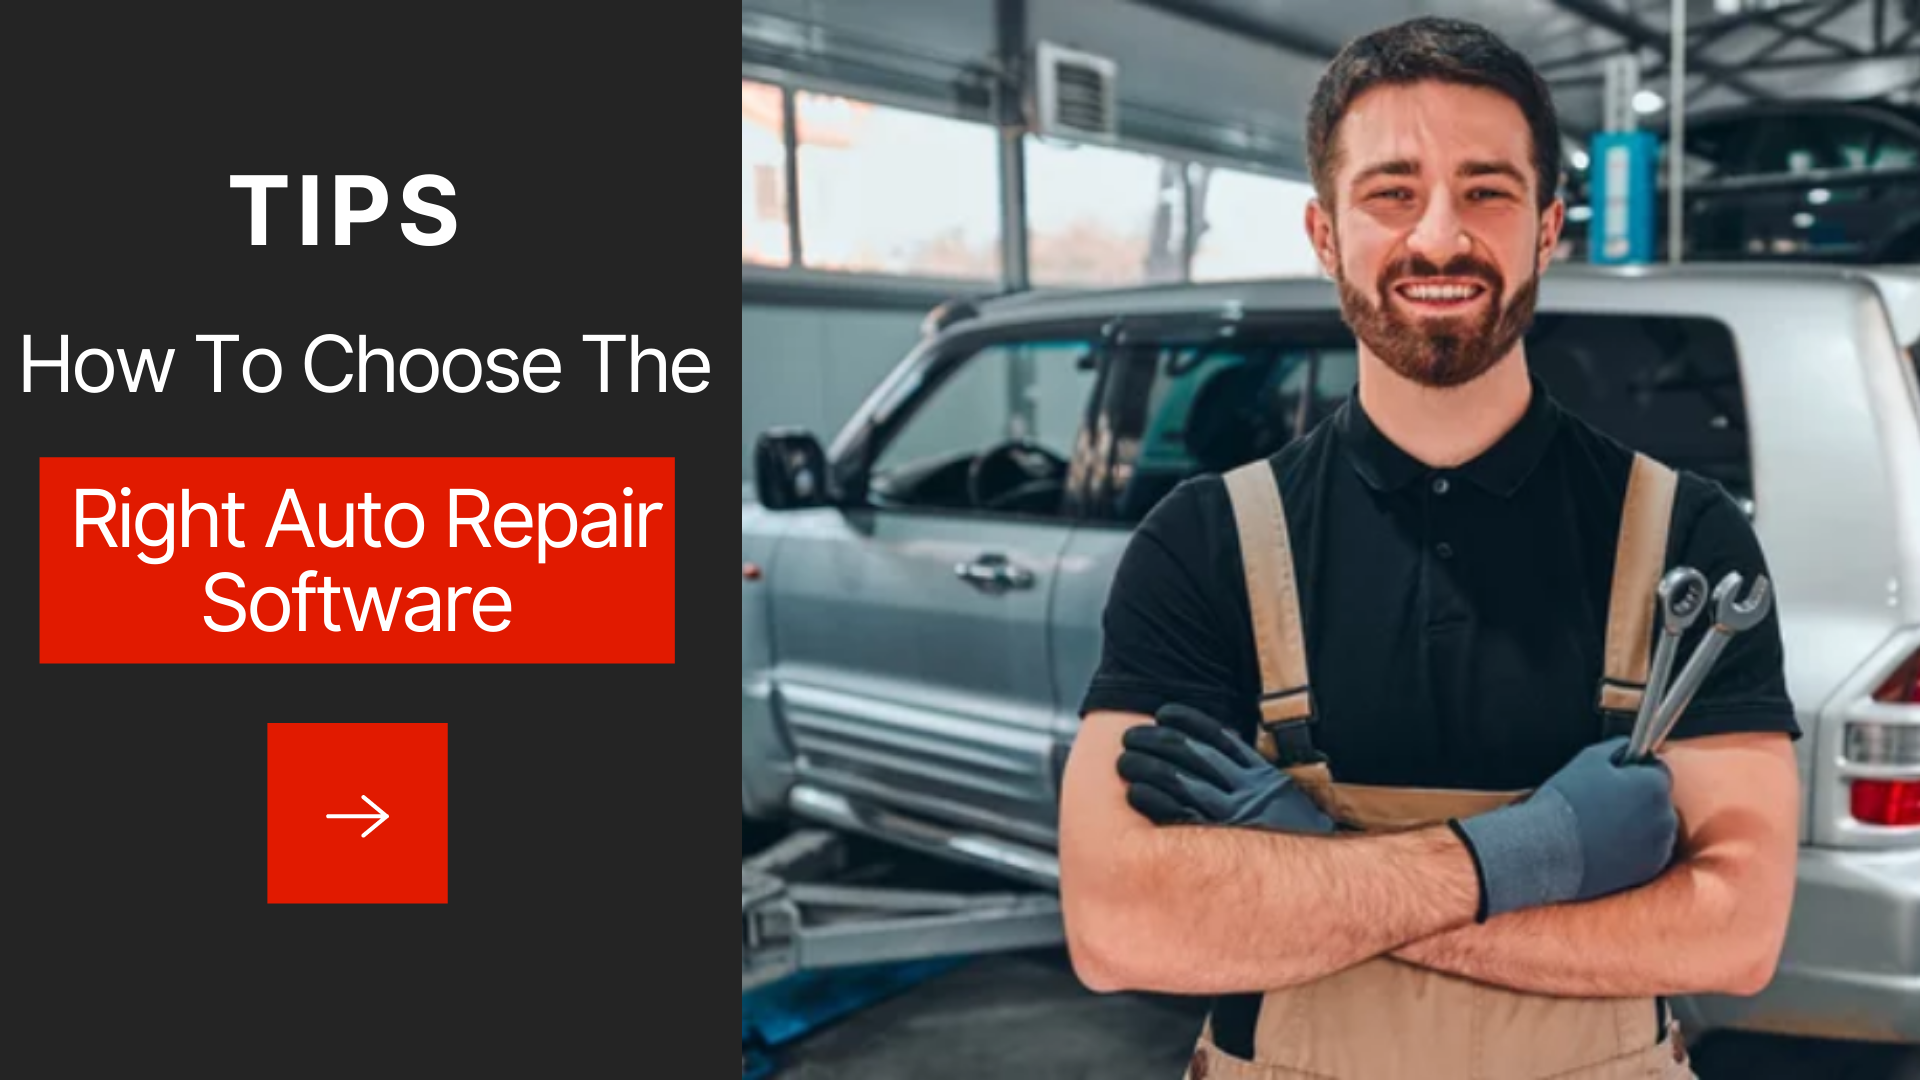 How to Choose the Right Auto Repair Software